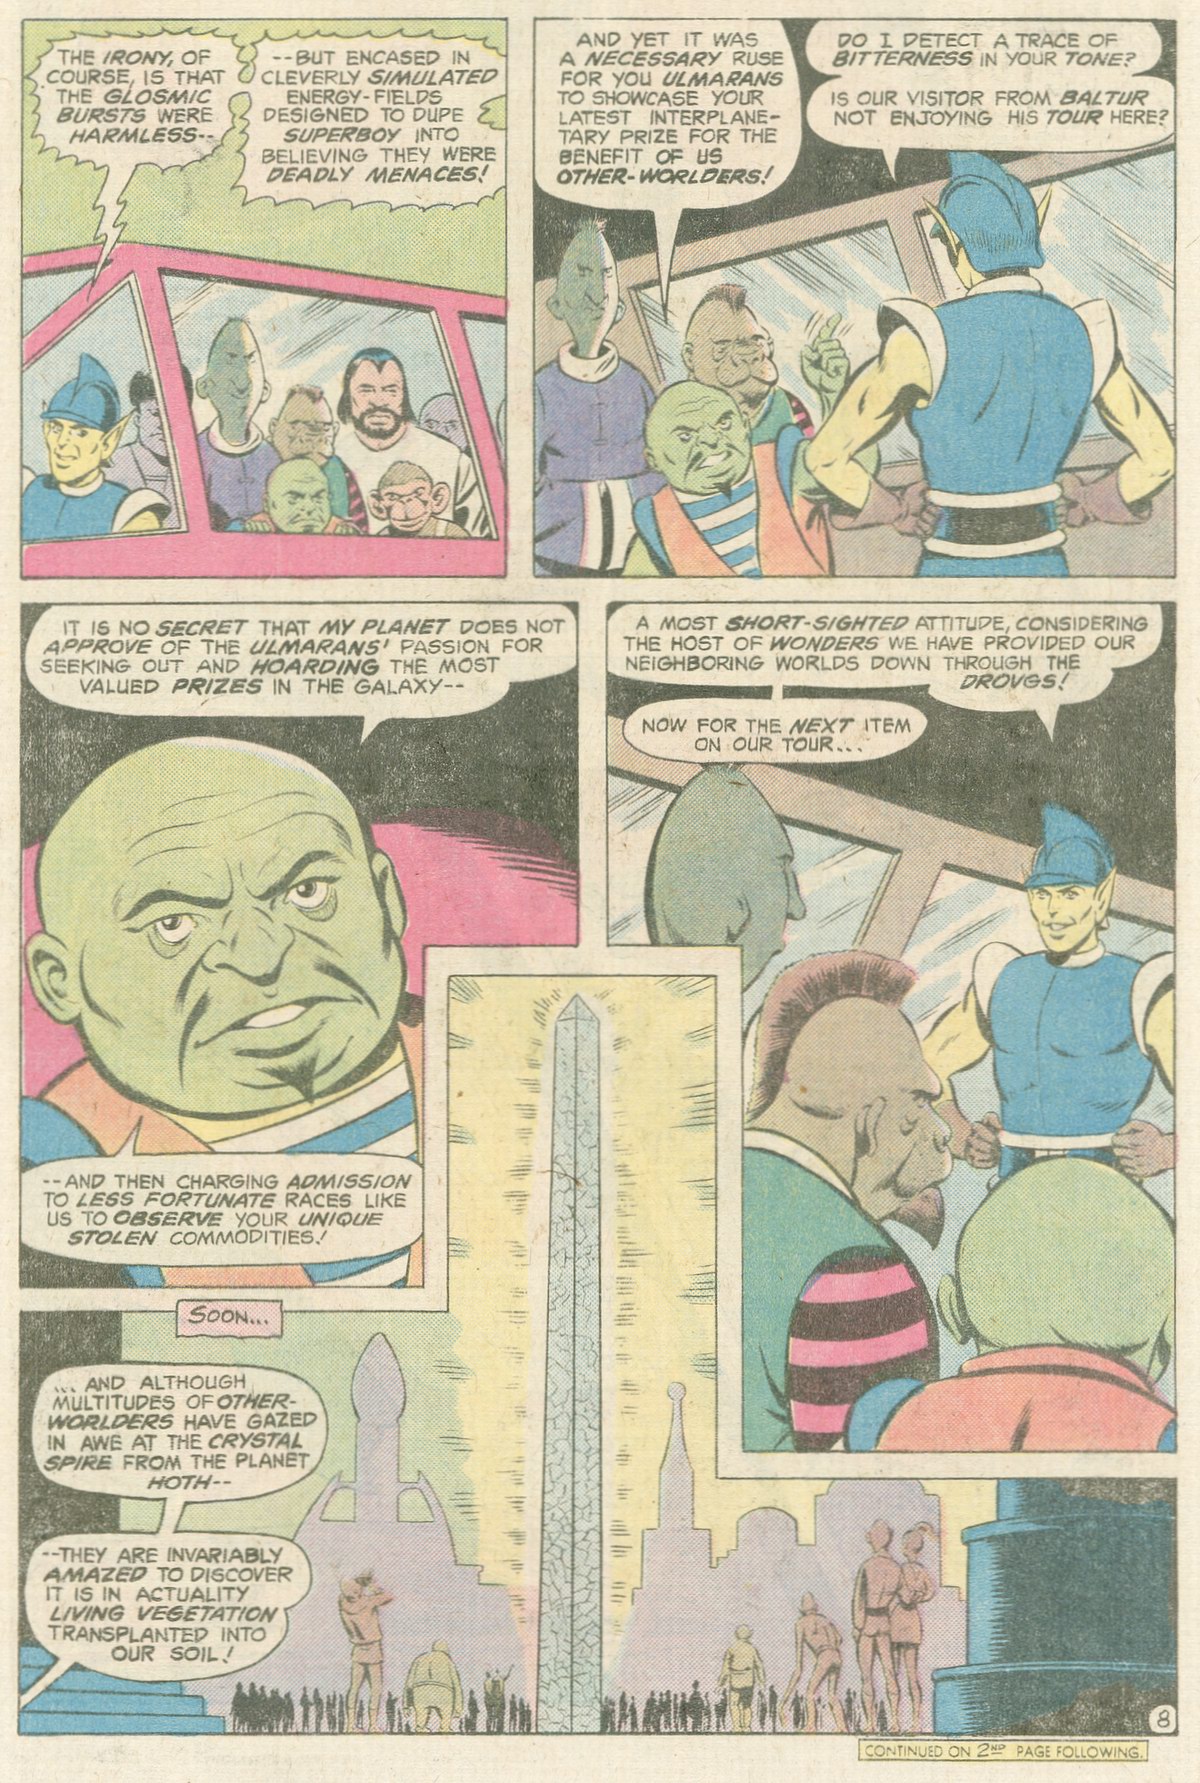 The New Adventures of Superboy 20 Page 8